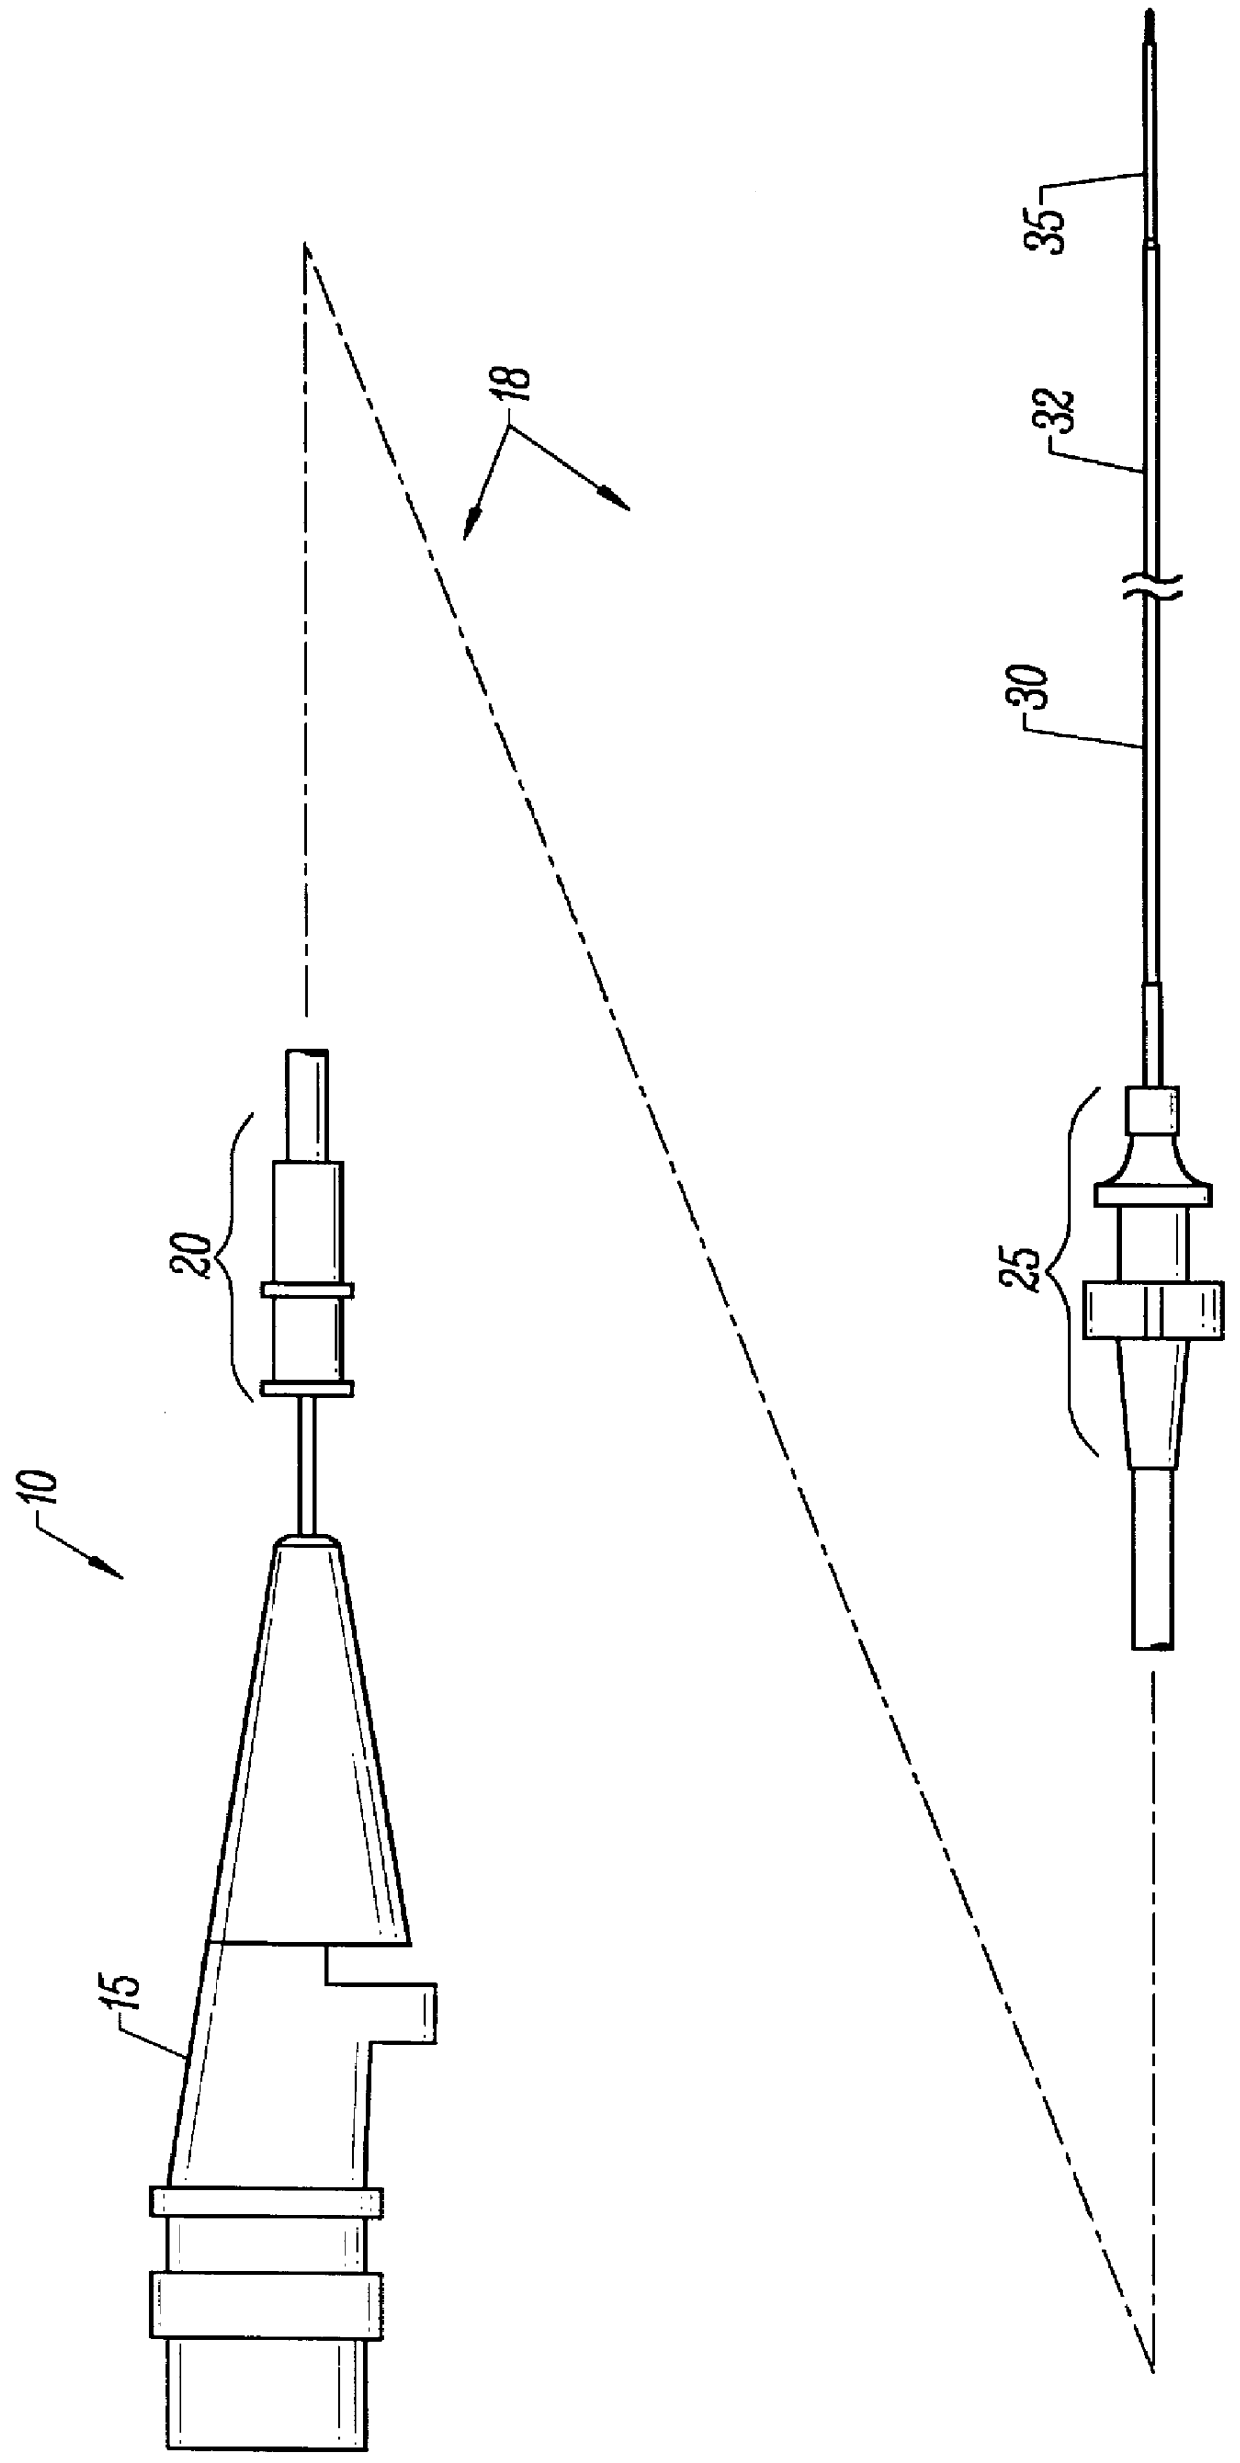 Catheher system having connectable distal and proximal portions